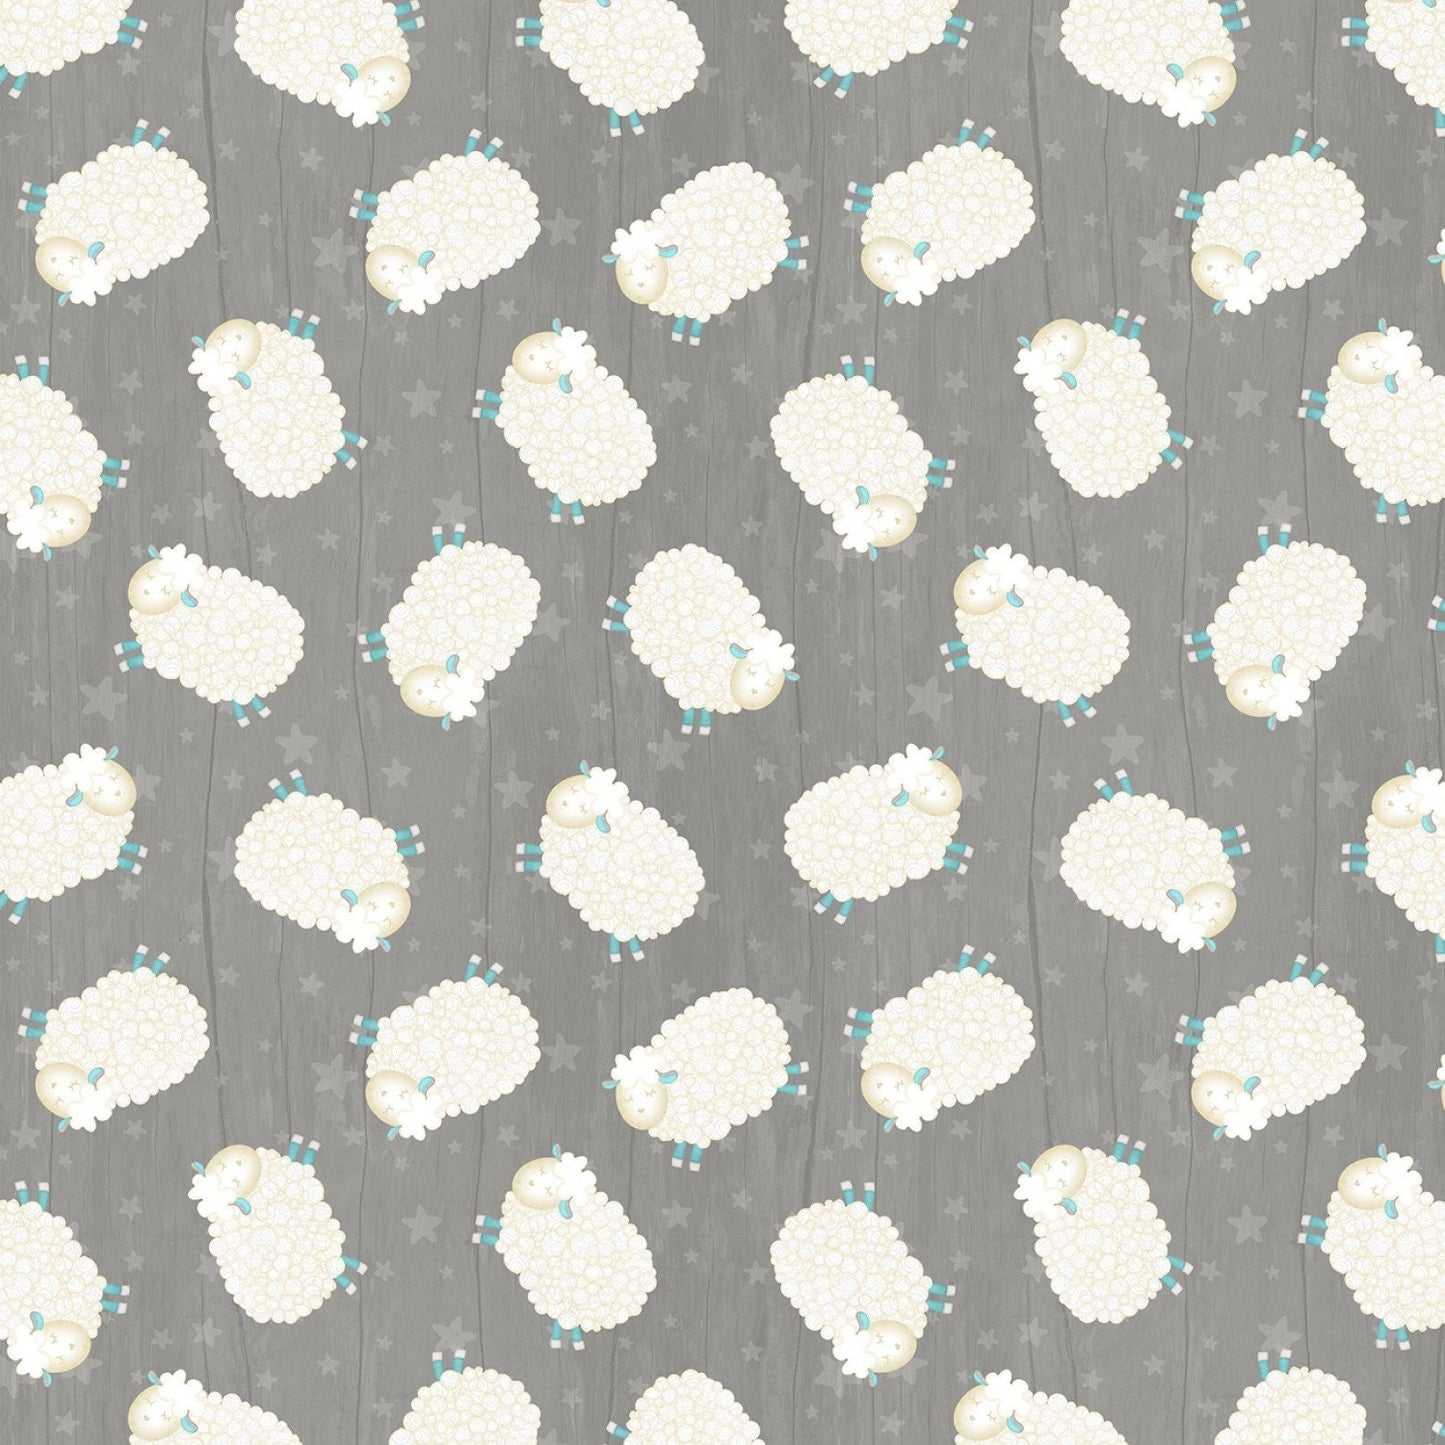 All Our Stars by Jennifer Pugh Dark Grey Tossed Sheep 82581-914 Cotton Woven Fabric